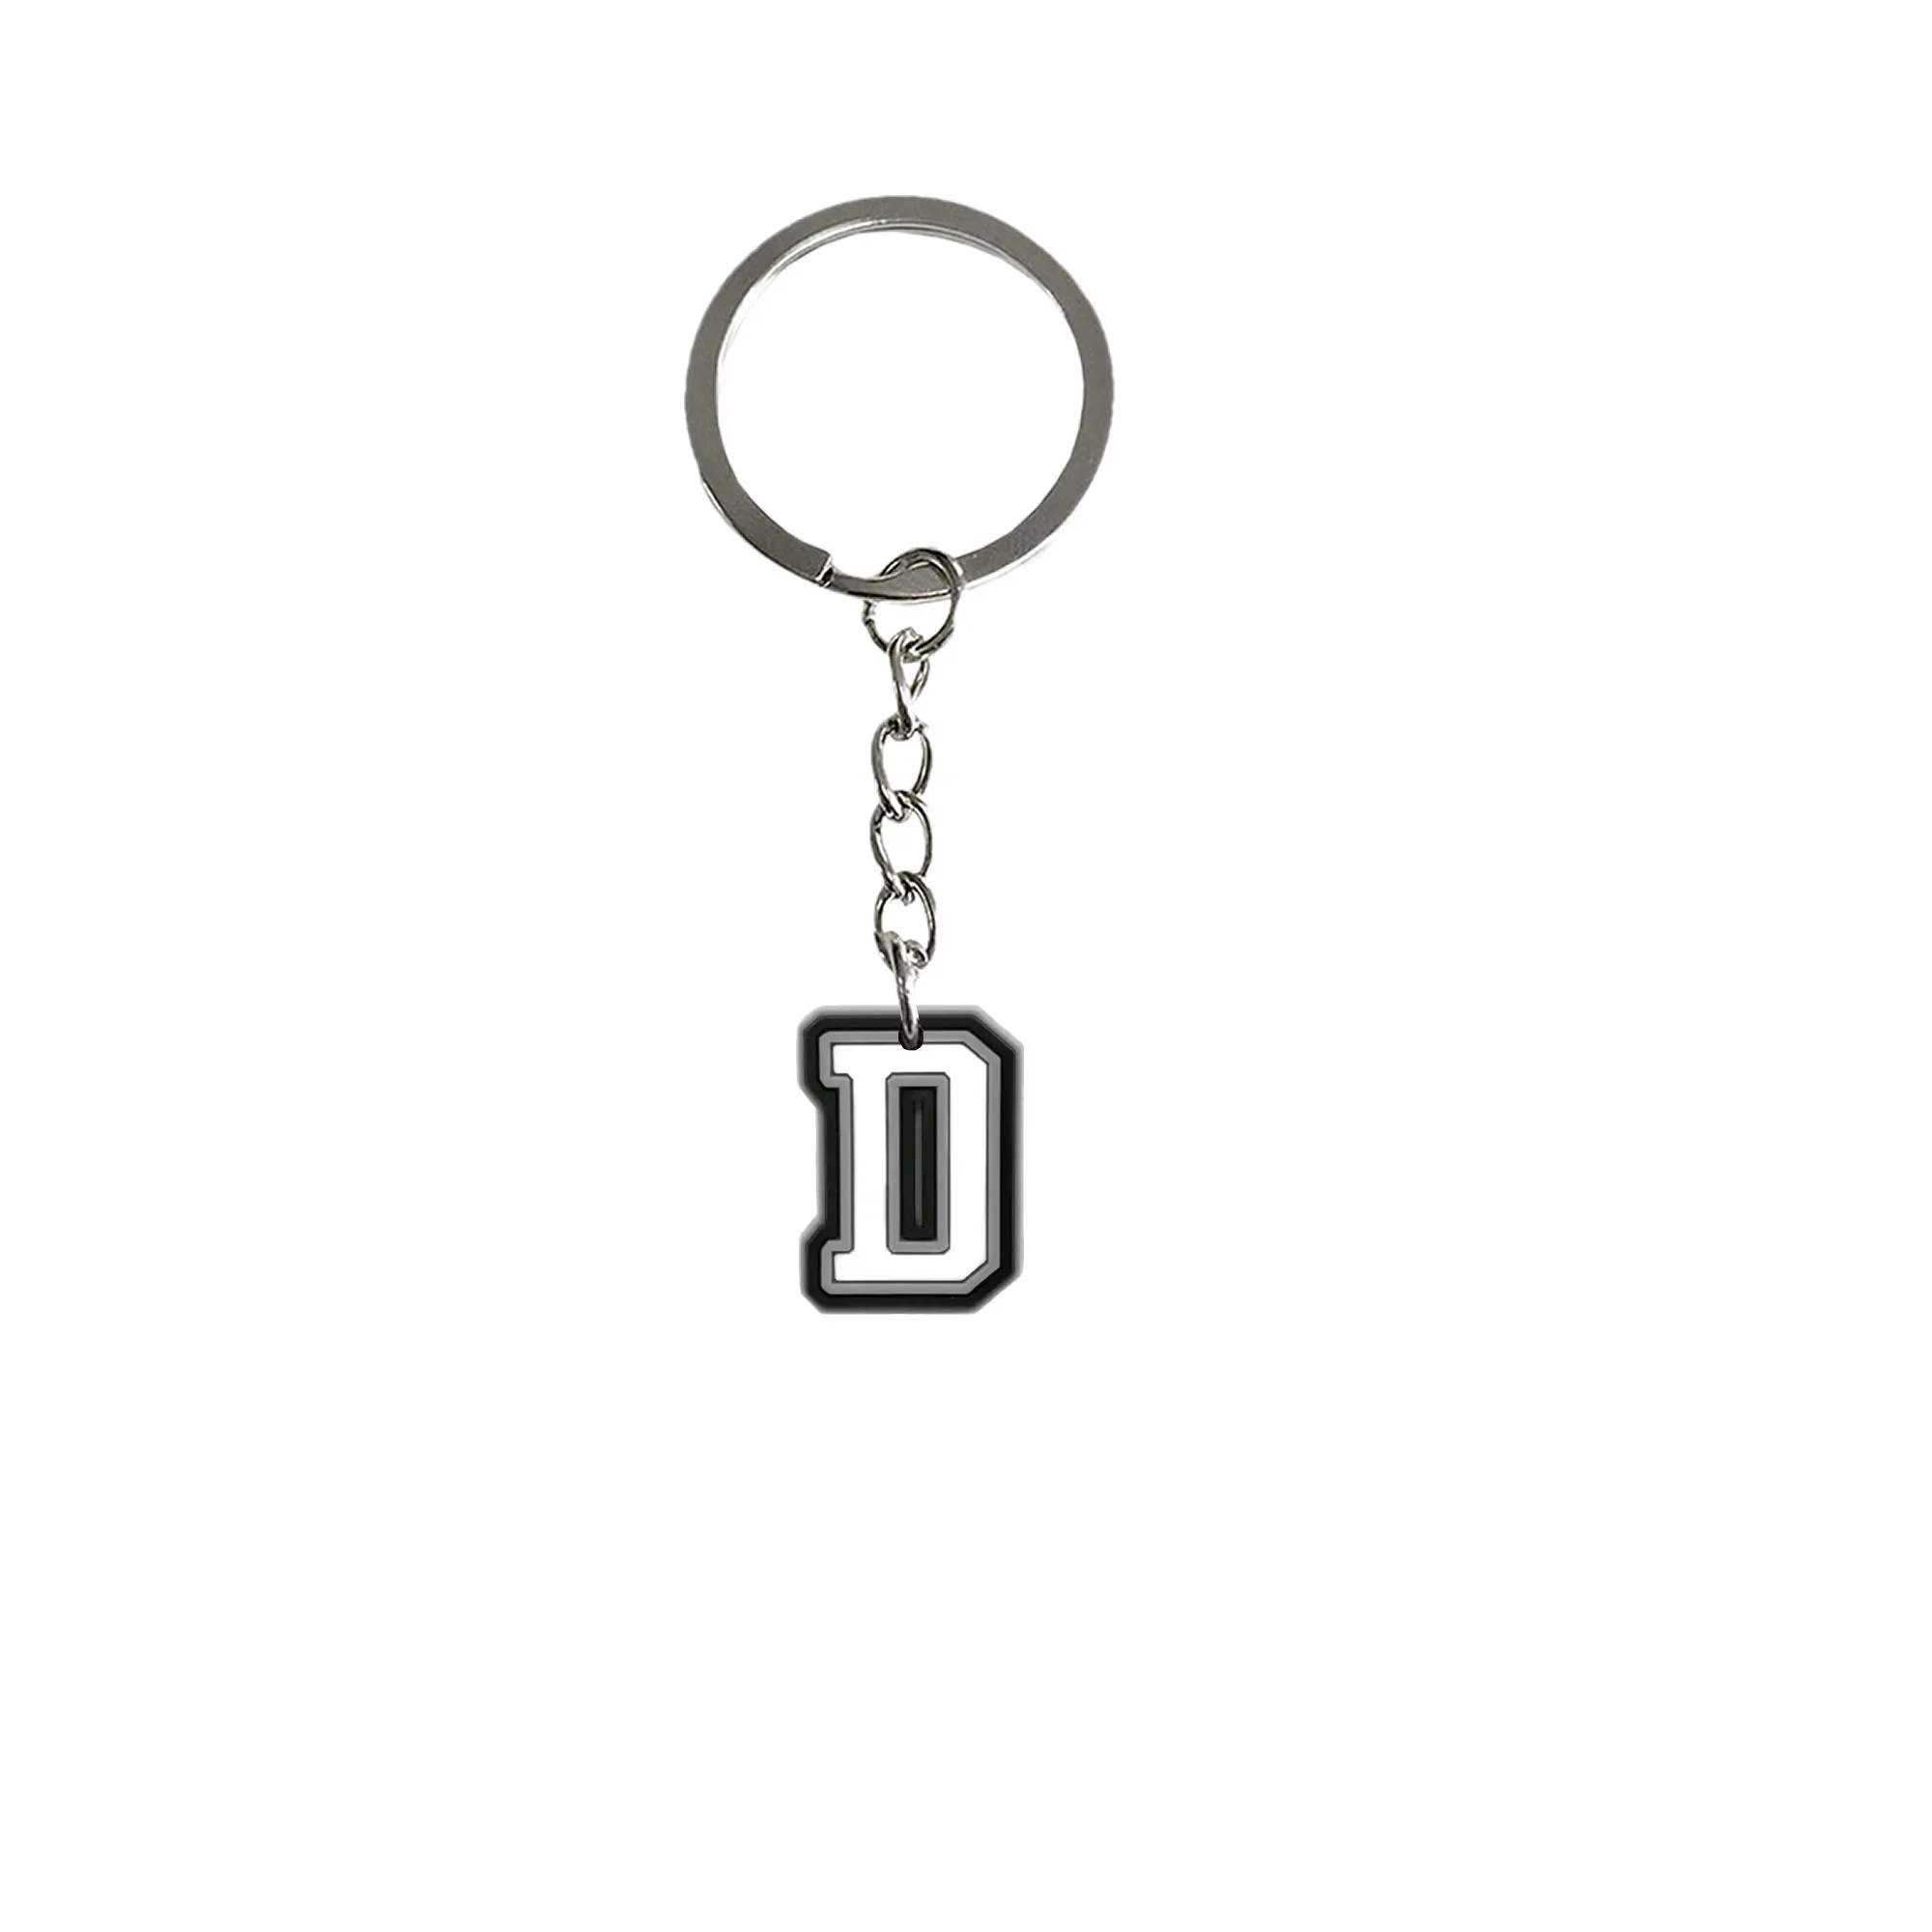 black letters keychain cute silicone key chain for adult gift kids party favors couple backpack chains women keyring suitable schoolbag purse handbag charms classroom school day birthday supplies